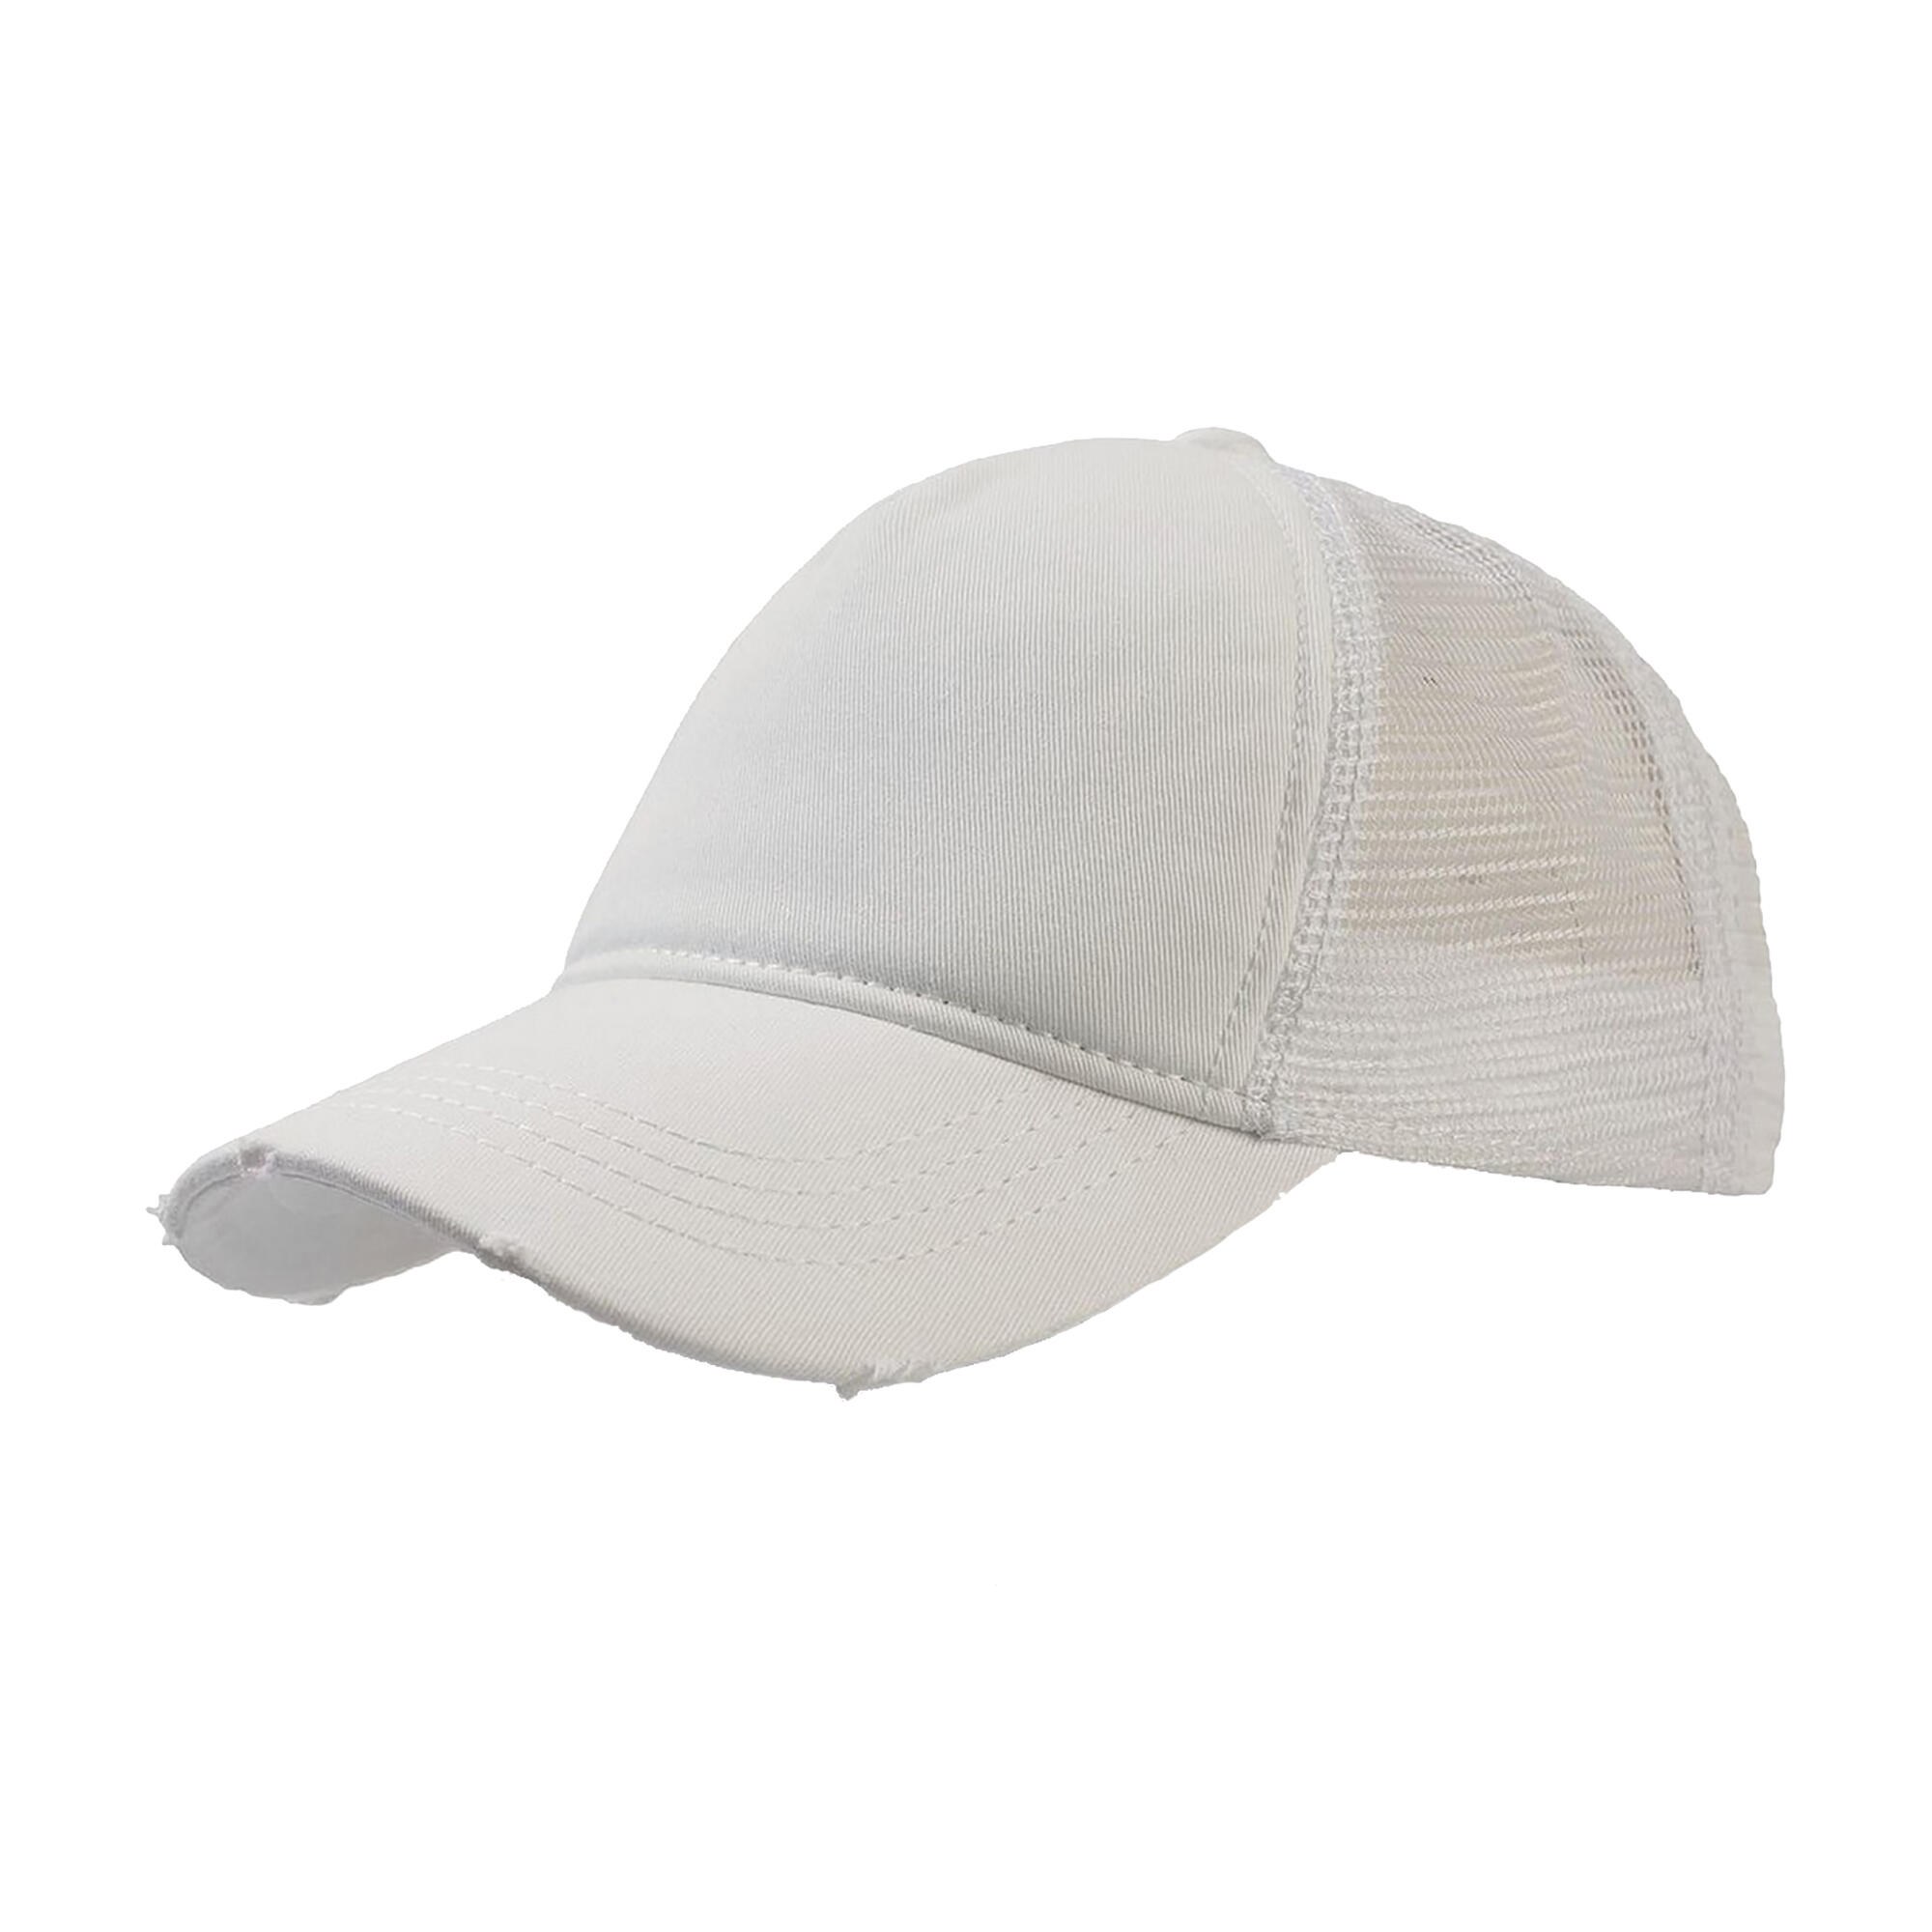 Rapper Destroyed 5 Panel Weathered Trucker Cap (Pack of 2) (White/White) 2/3